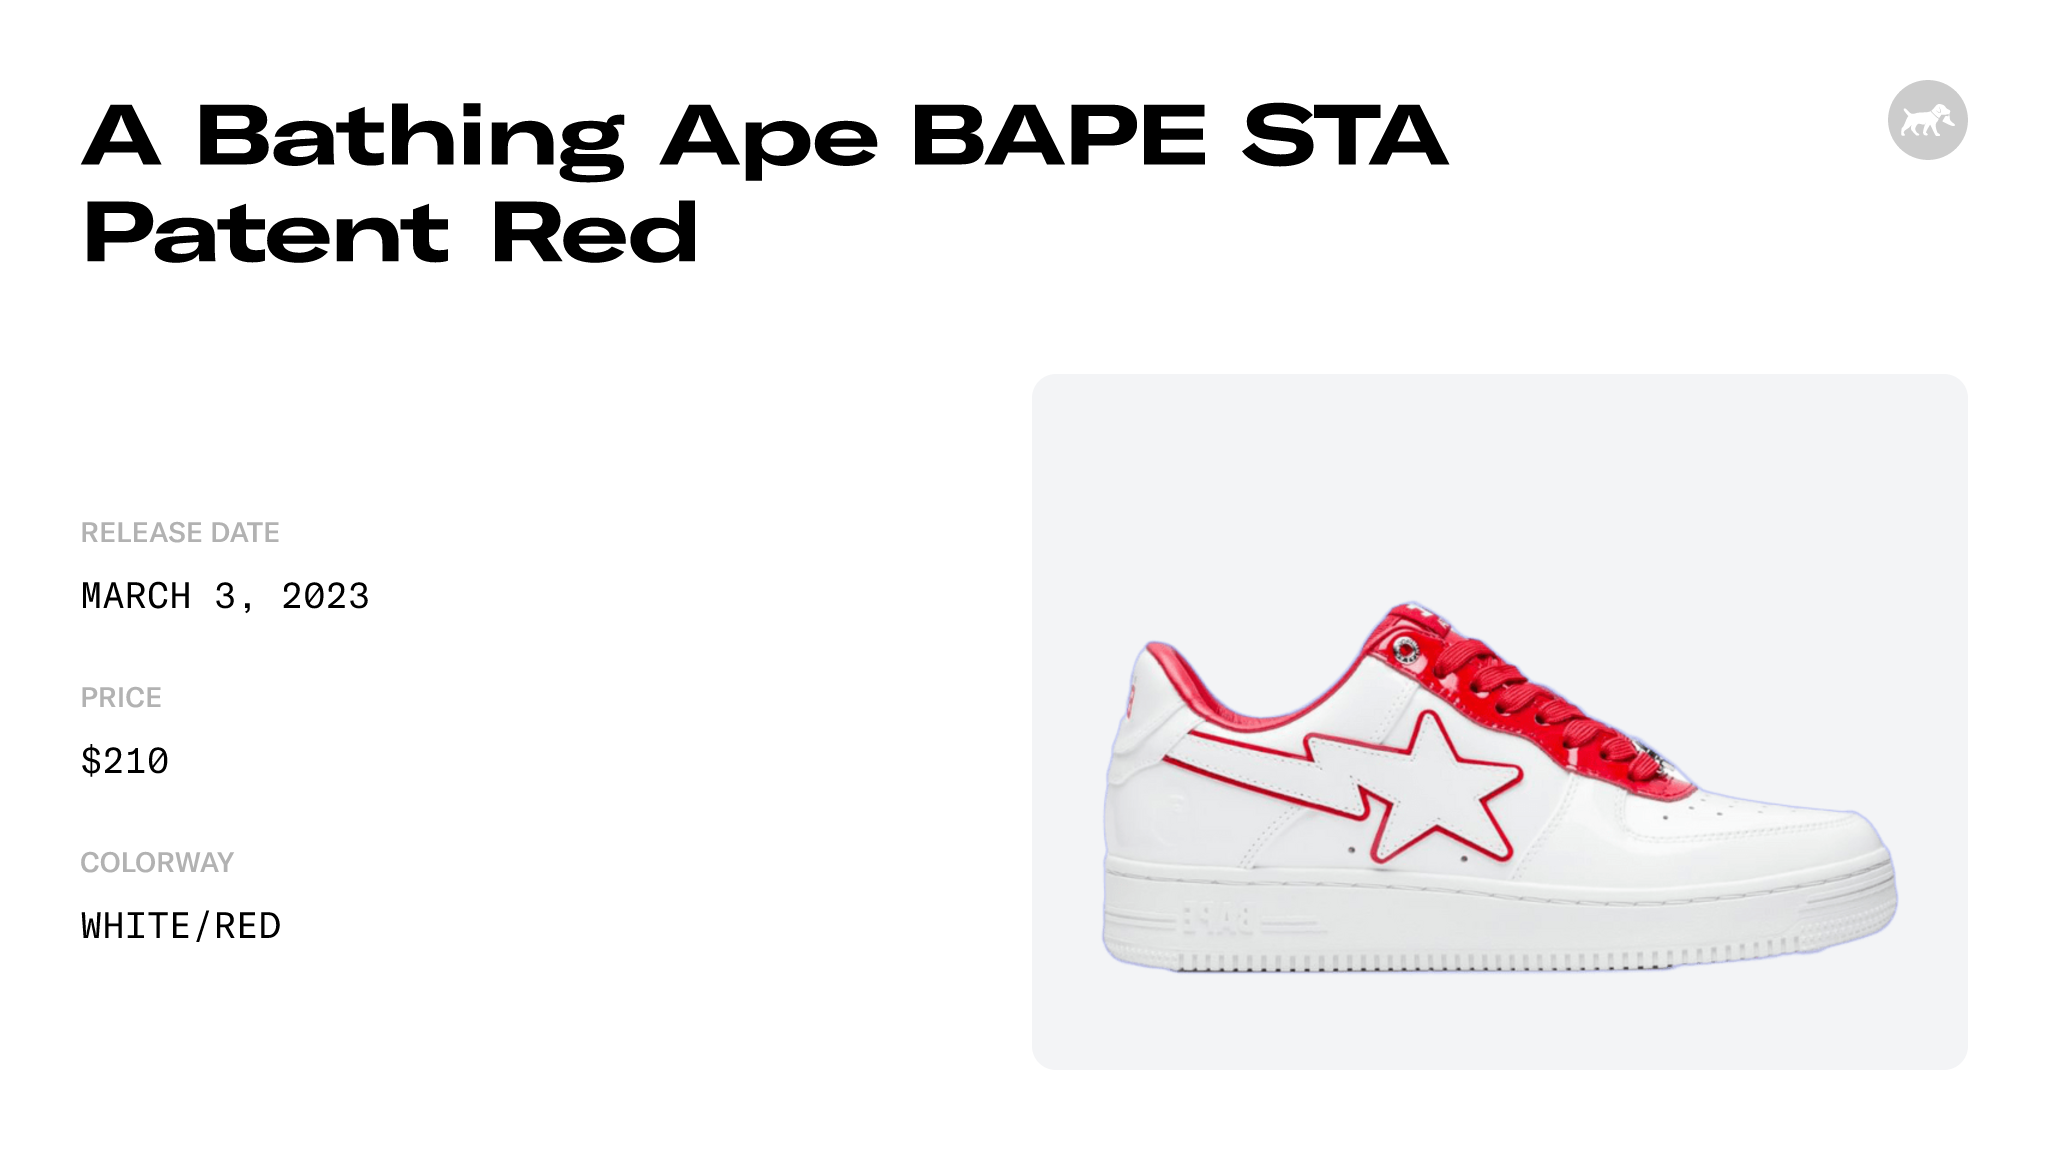 A Bathing Ape BAPE STA Patent Red - 1J30-191-017/1J30-291-017 Raffles and  Release Date